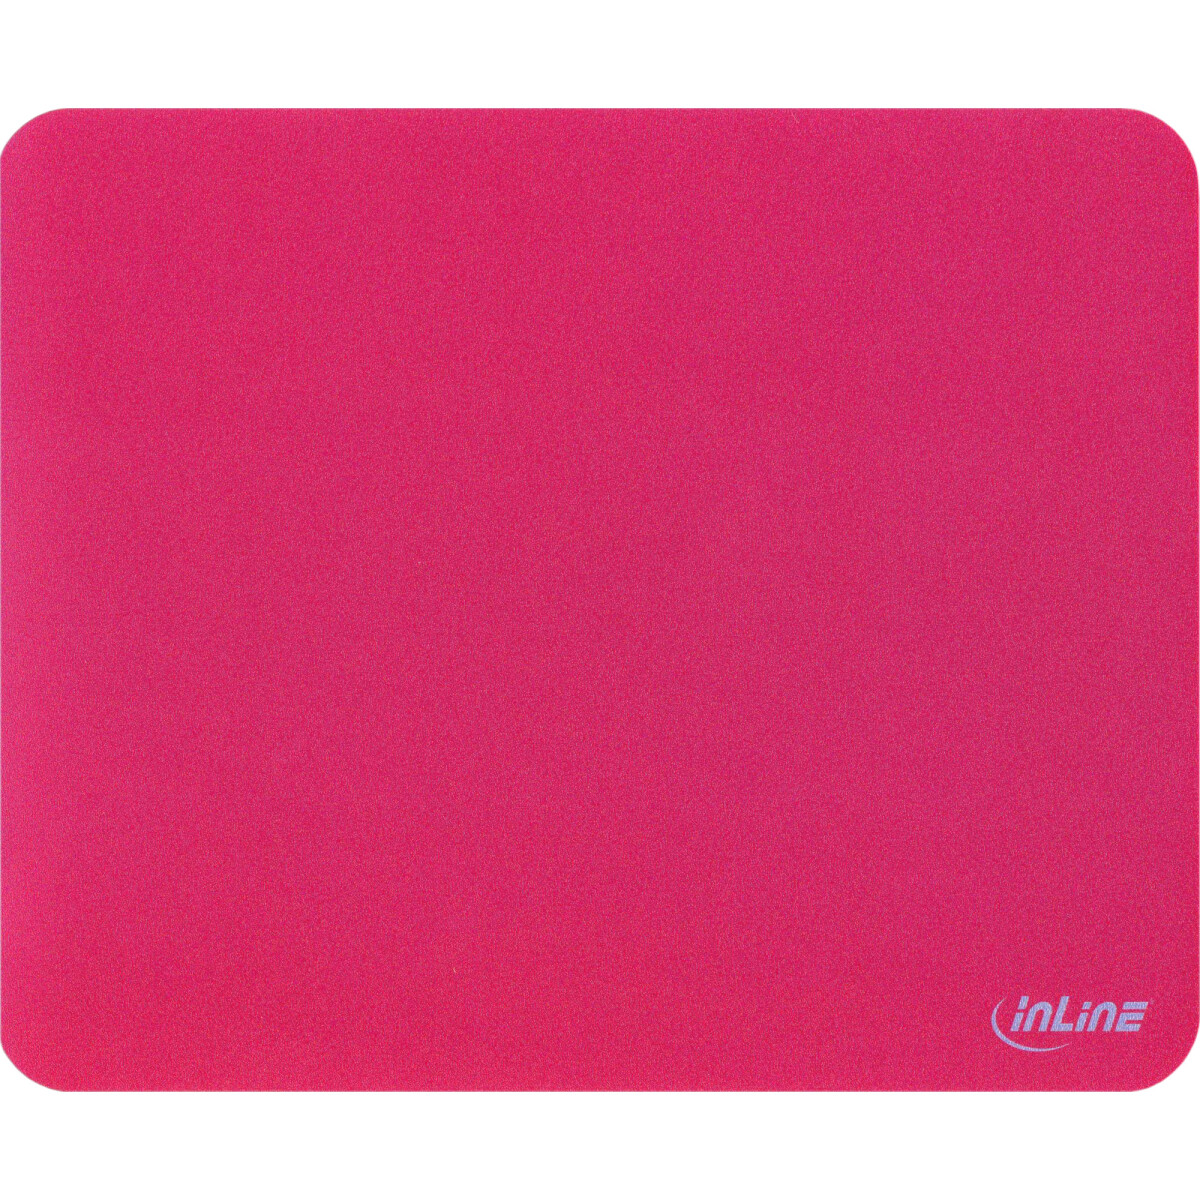 InLine® Mouse pad, laser, ultra-thin, red, 220x180x0.4mm